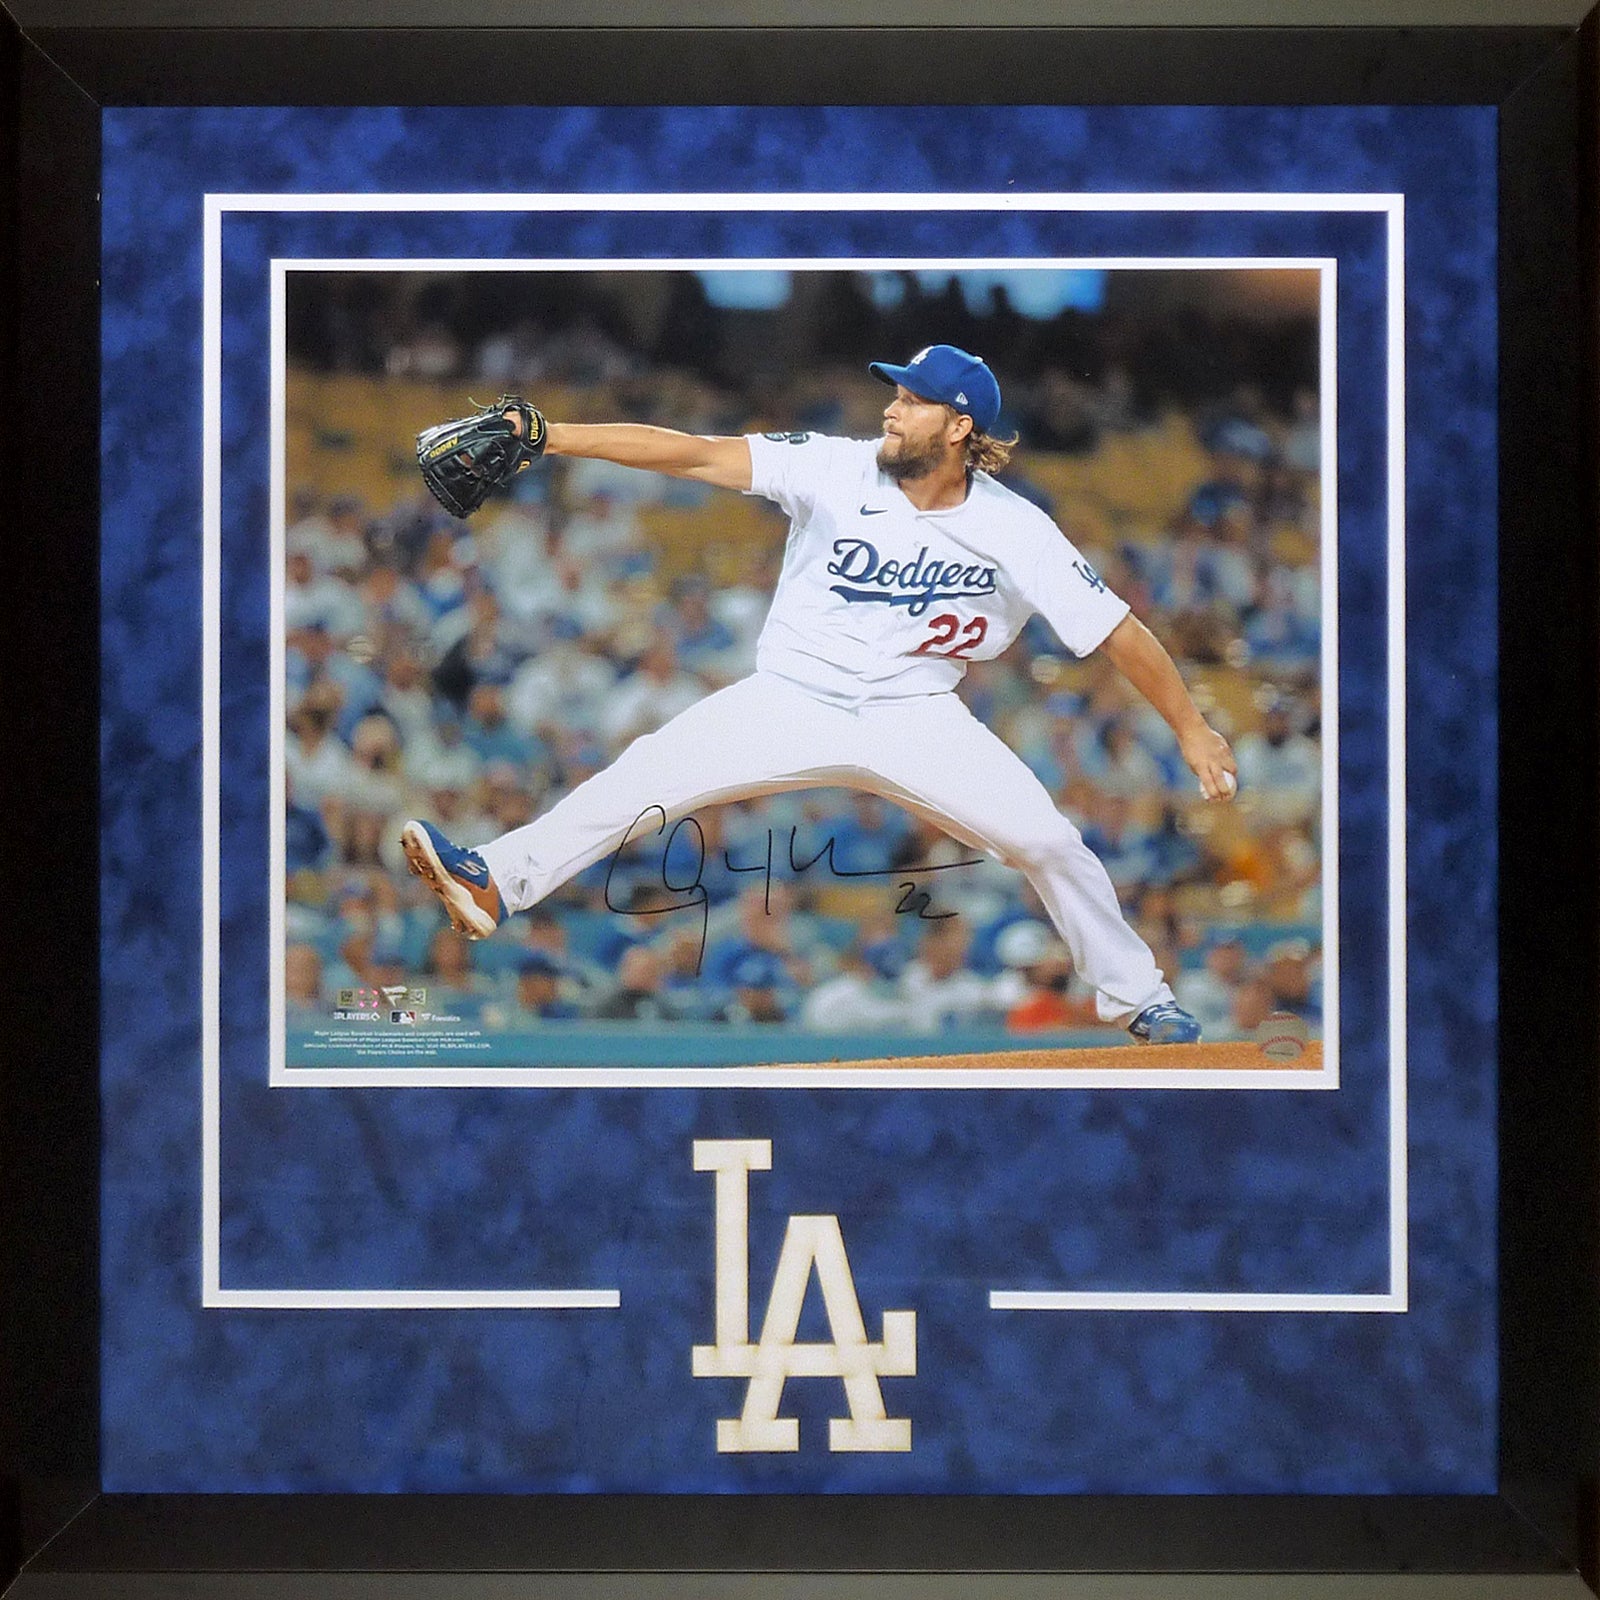 Clayton Kershaw Autographed Los Angeles Dodgers Deluxe Framed 16x20 Photo - Fanatics